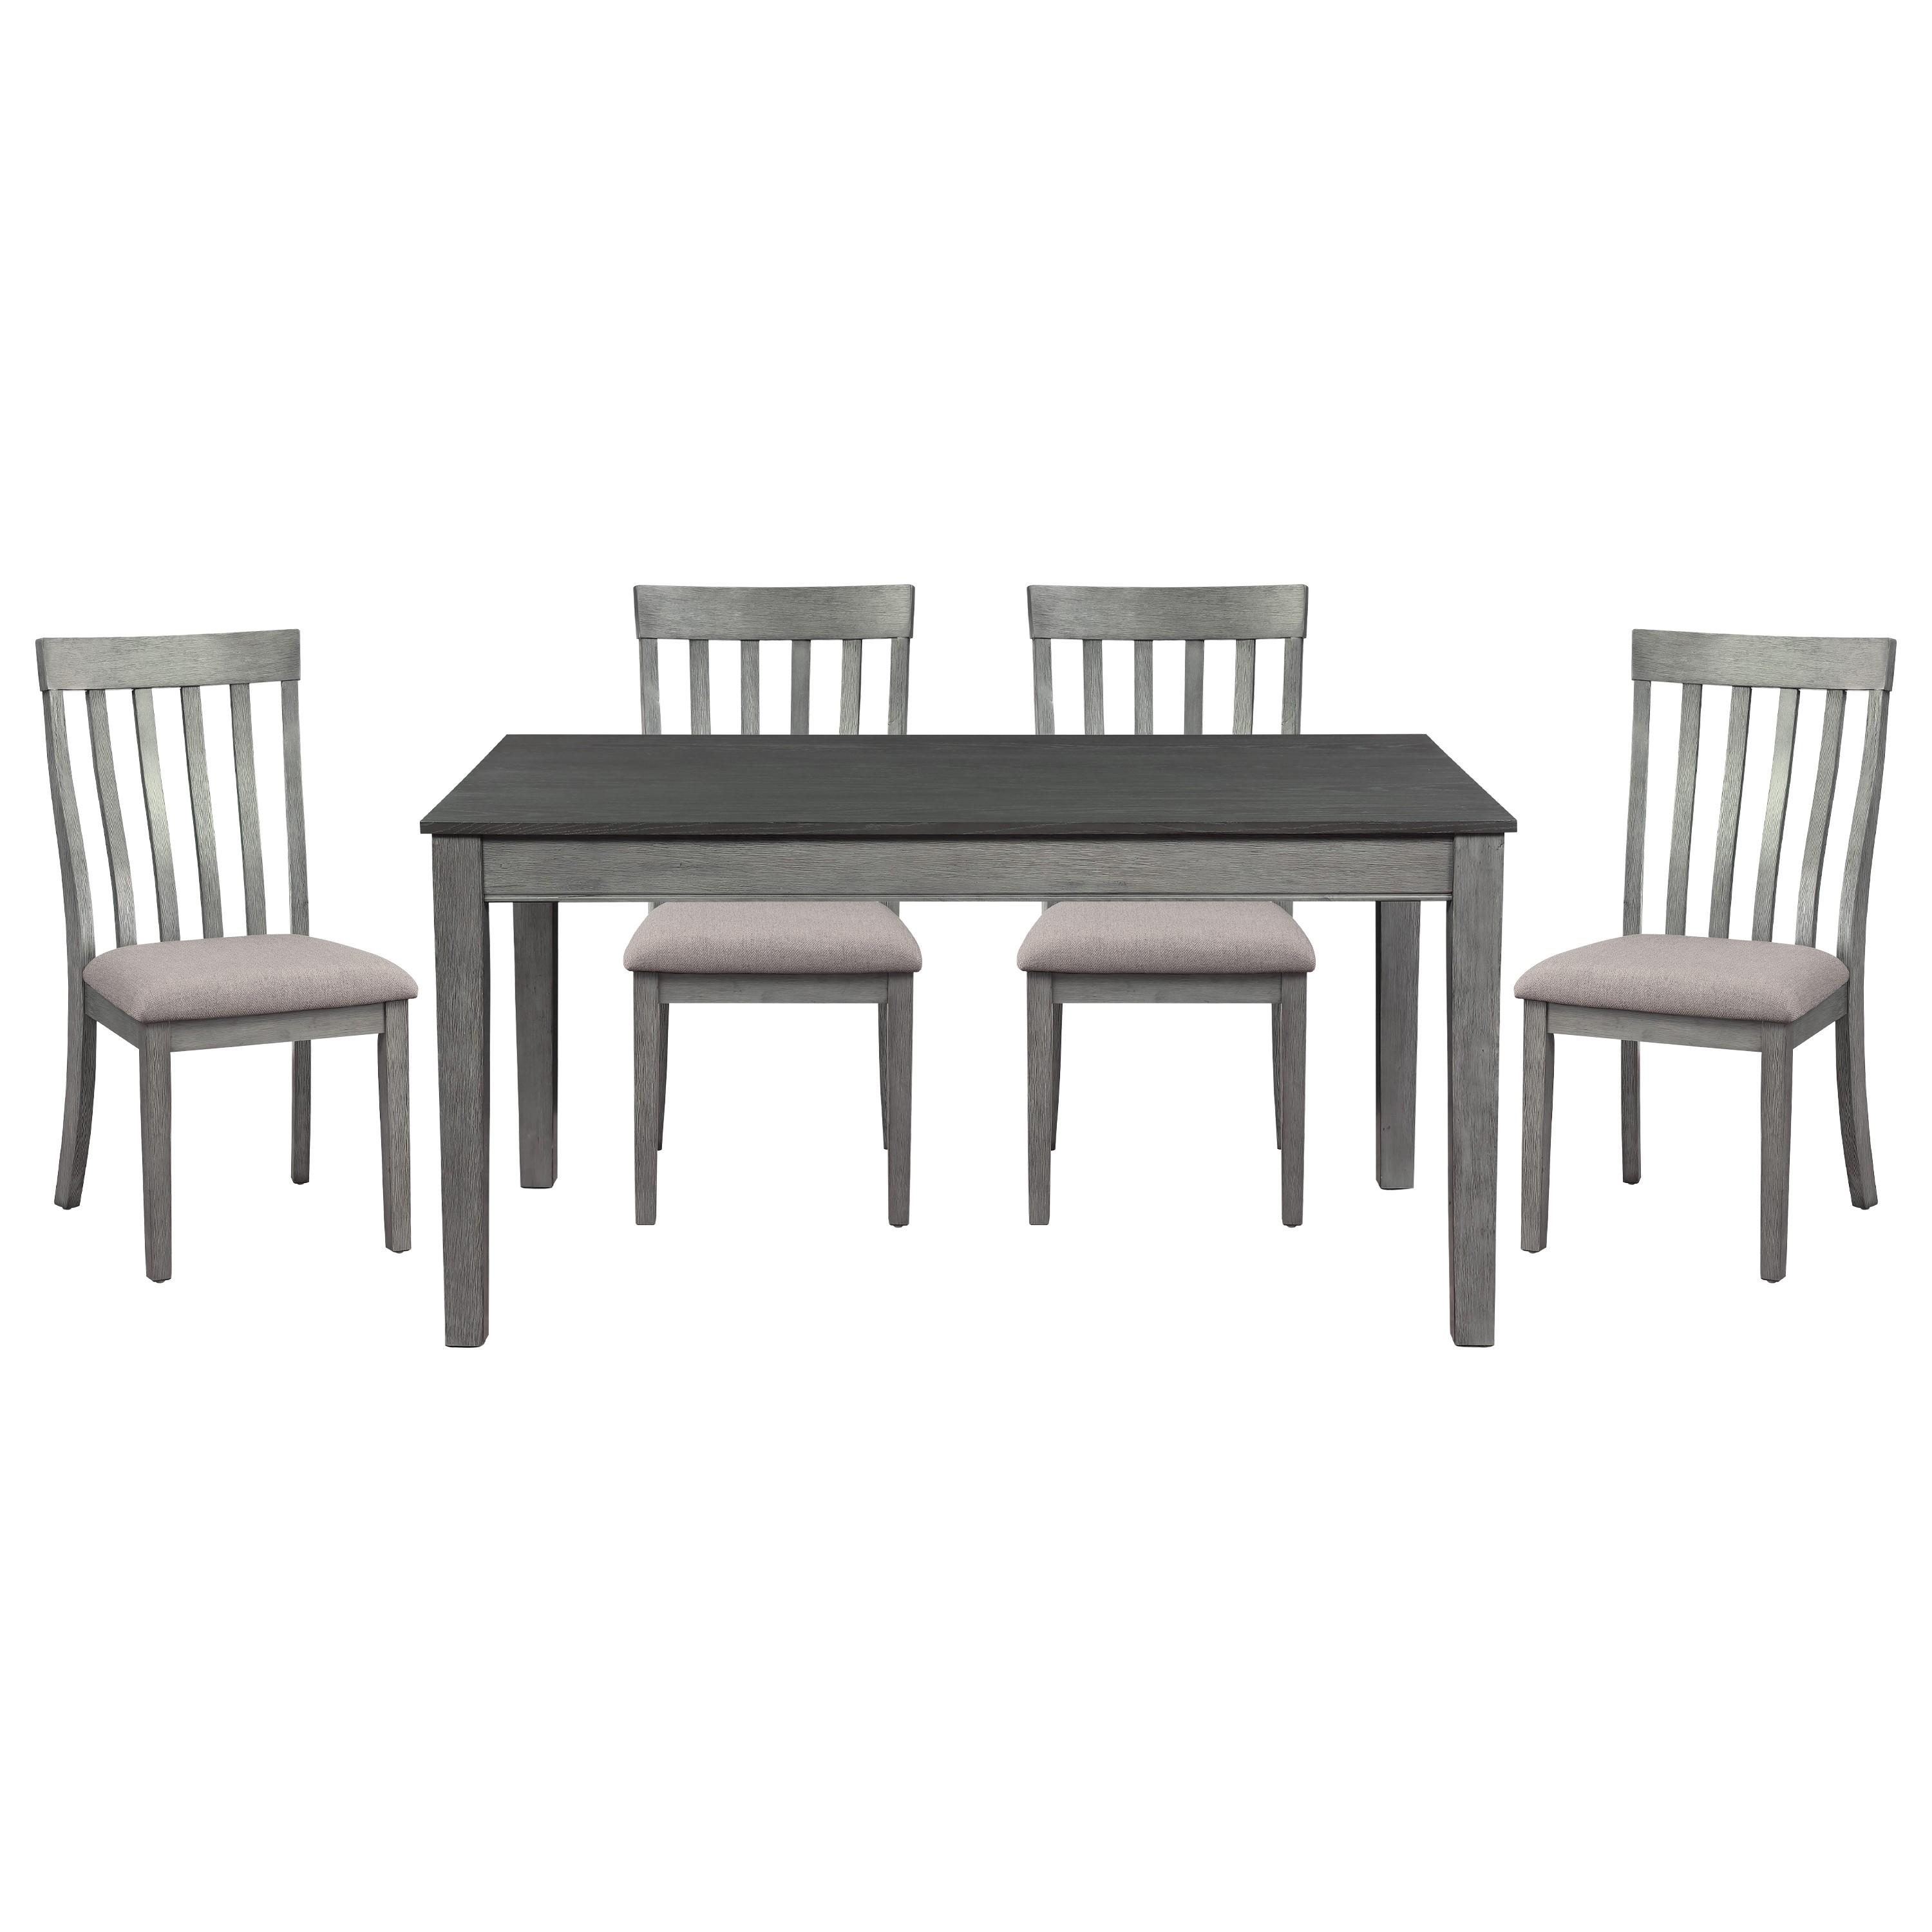 Transitional Dining Room Set 5706GY-60*5PC Armhurst 5706GY-60*5PC in Gray Polyester